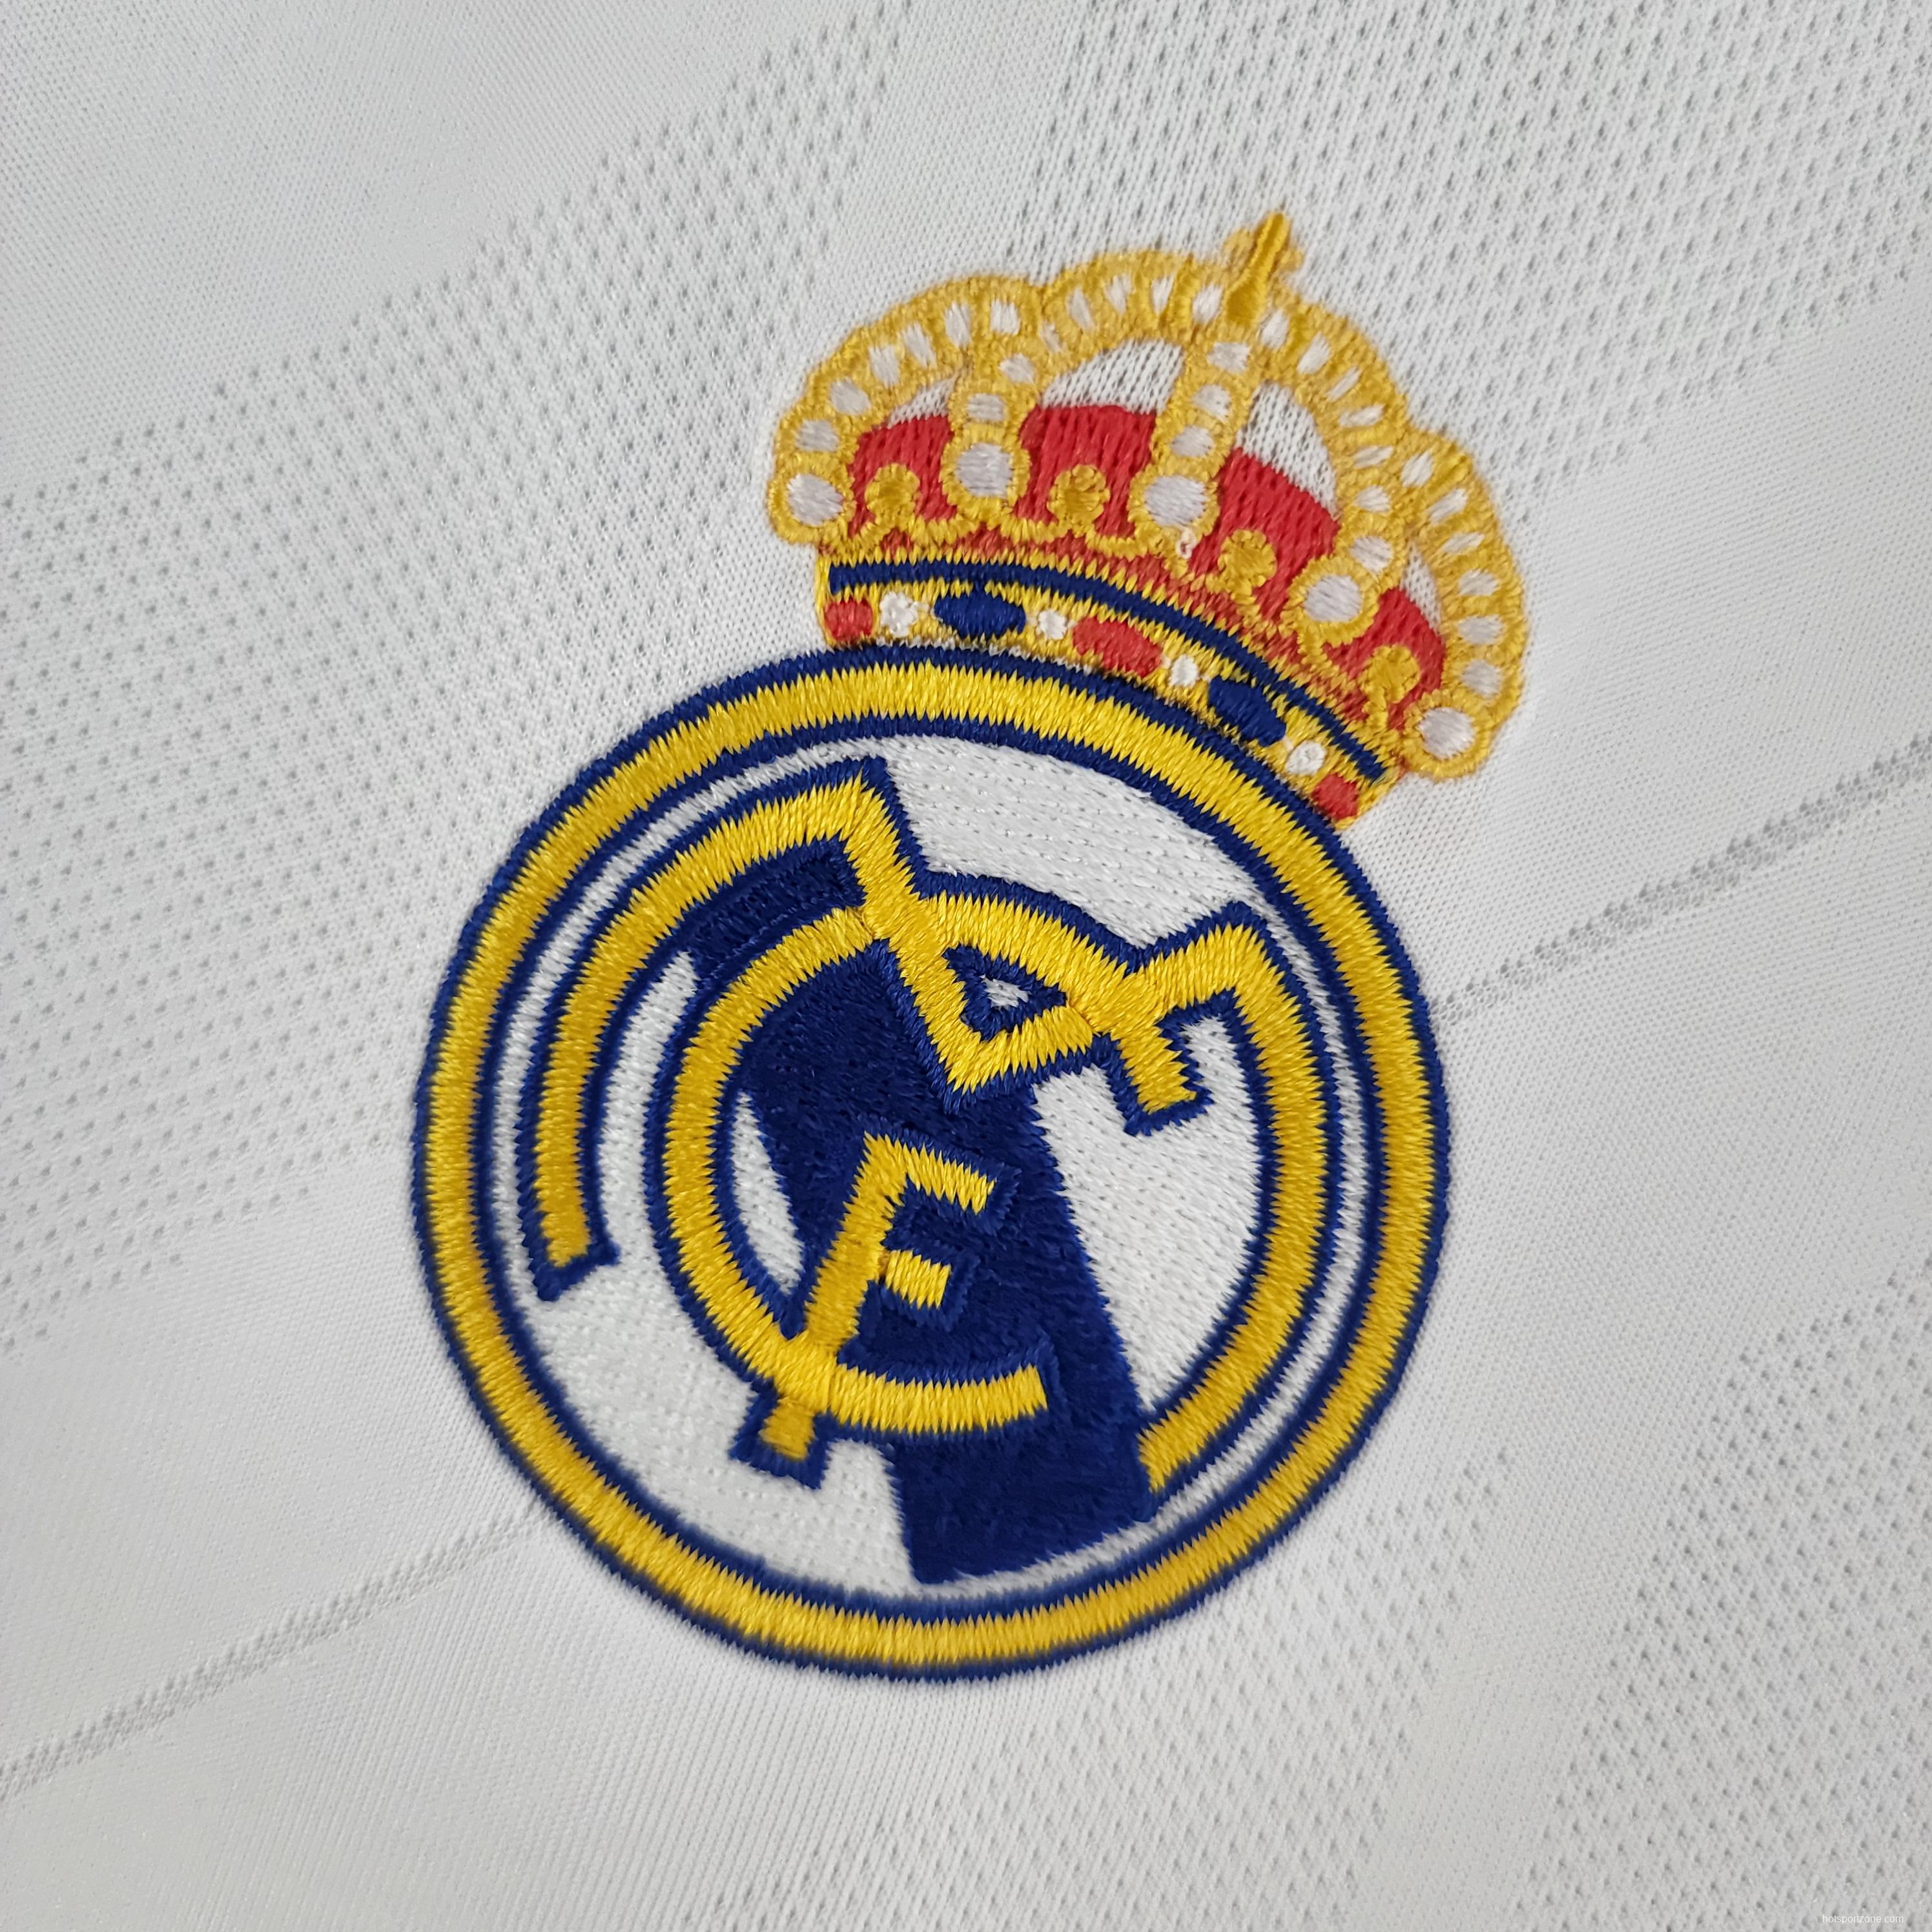 Retro 17/18 Real Madrid Home Soccer Jersey